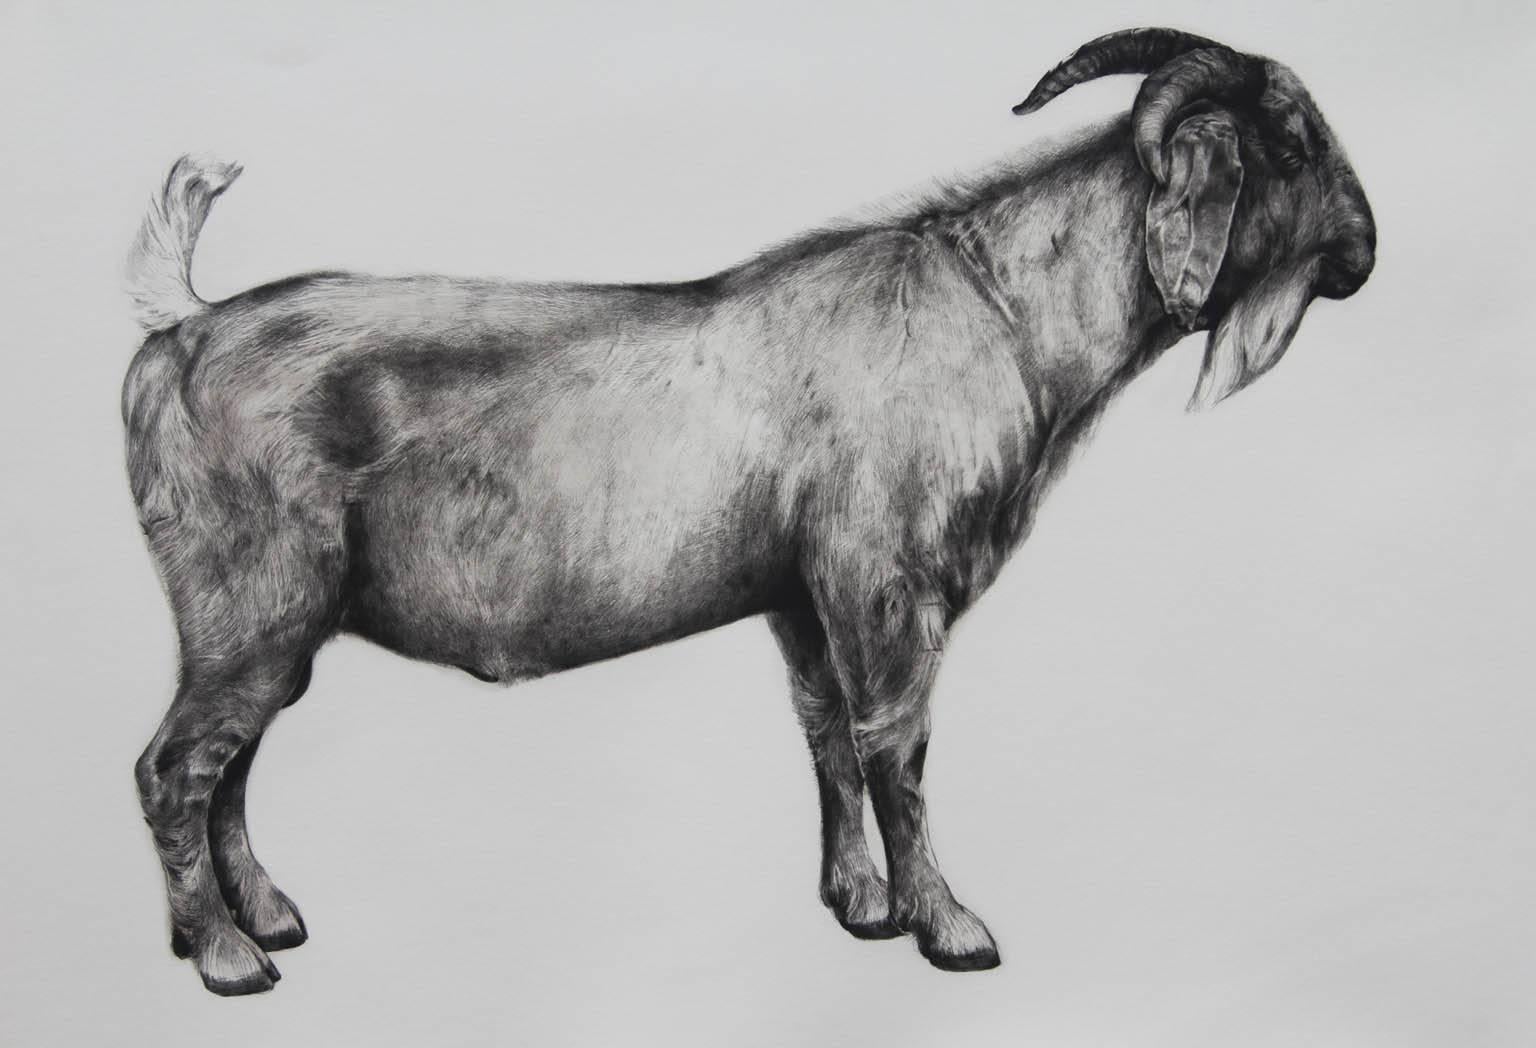 Tammy Mackay Print – The Bearded One, black and white goat print, Animal Art, Limited edition print